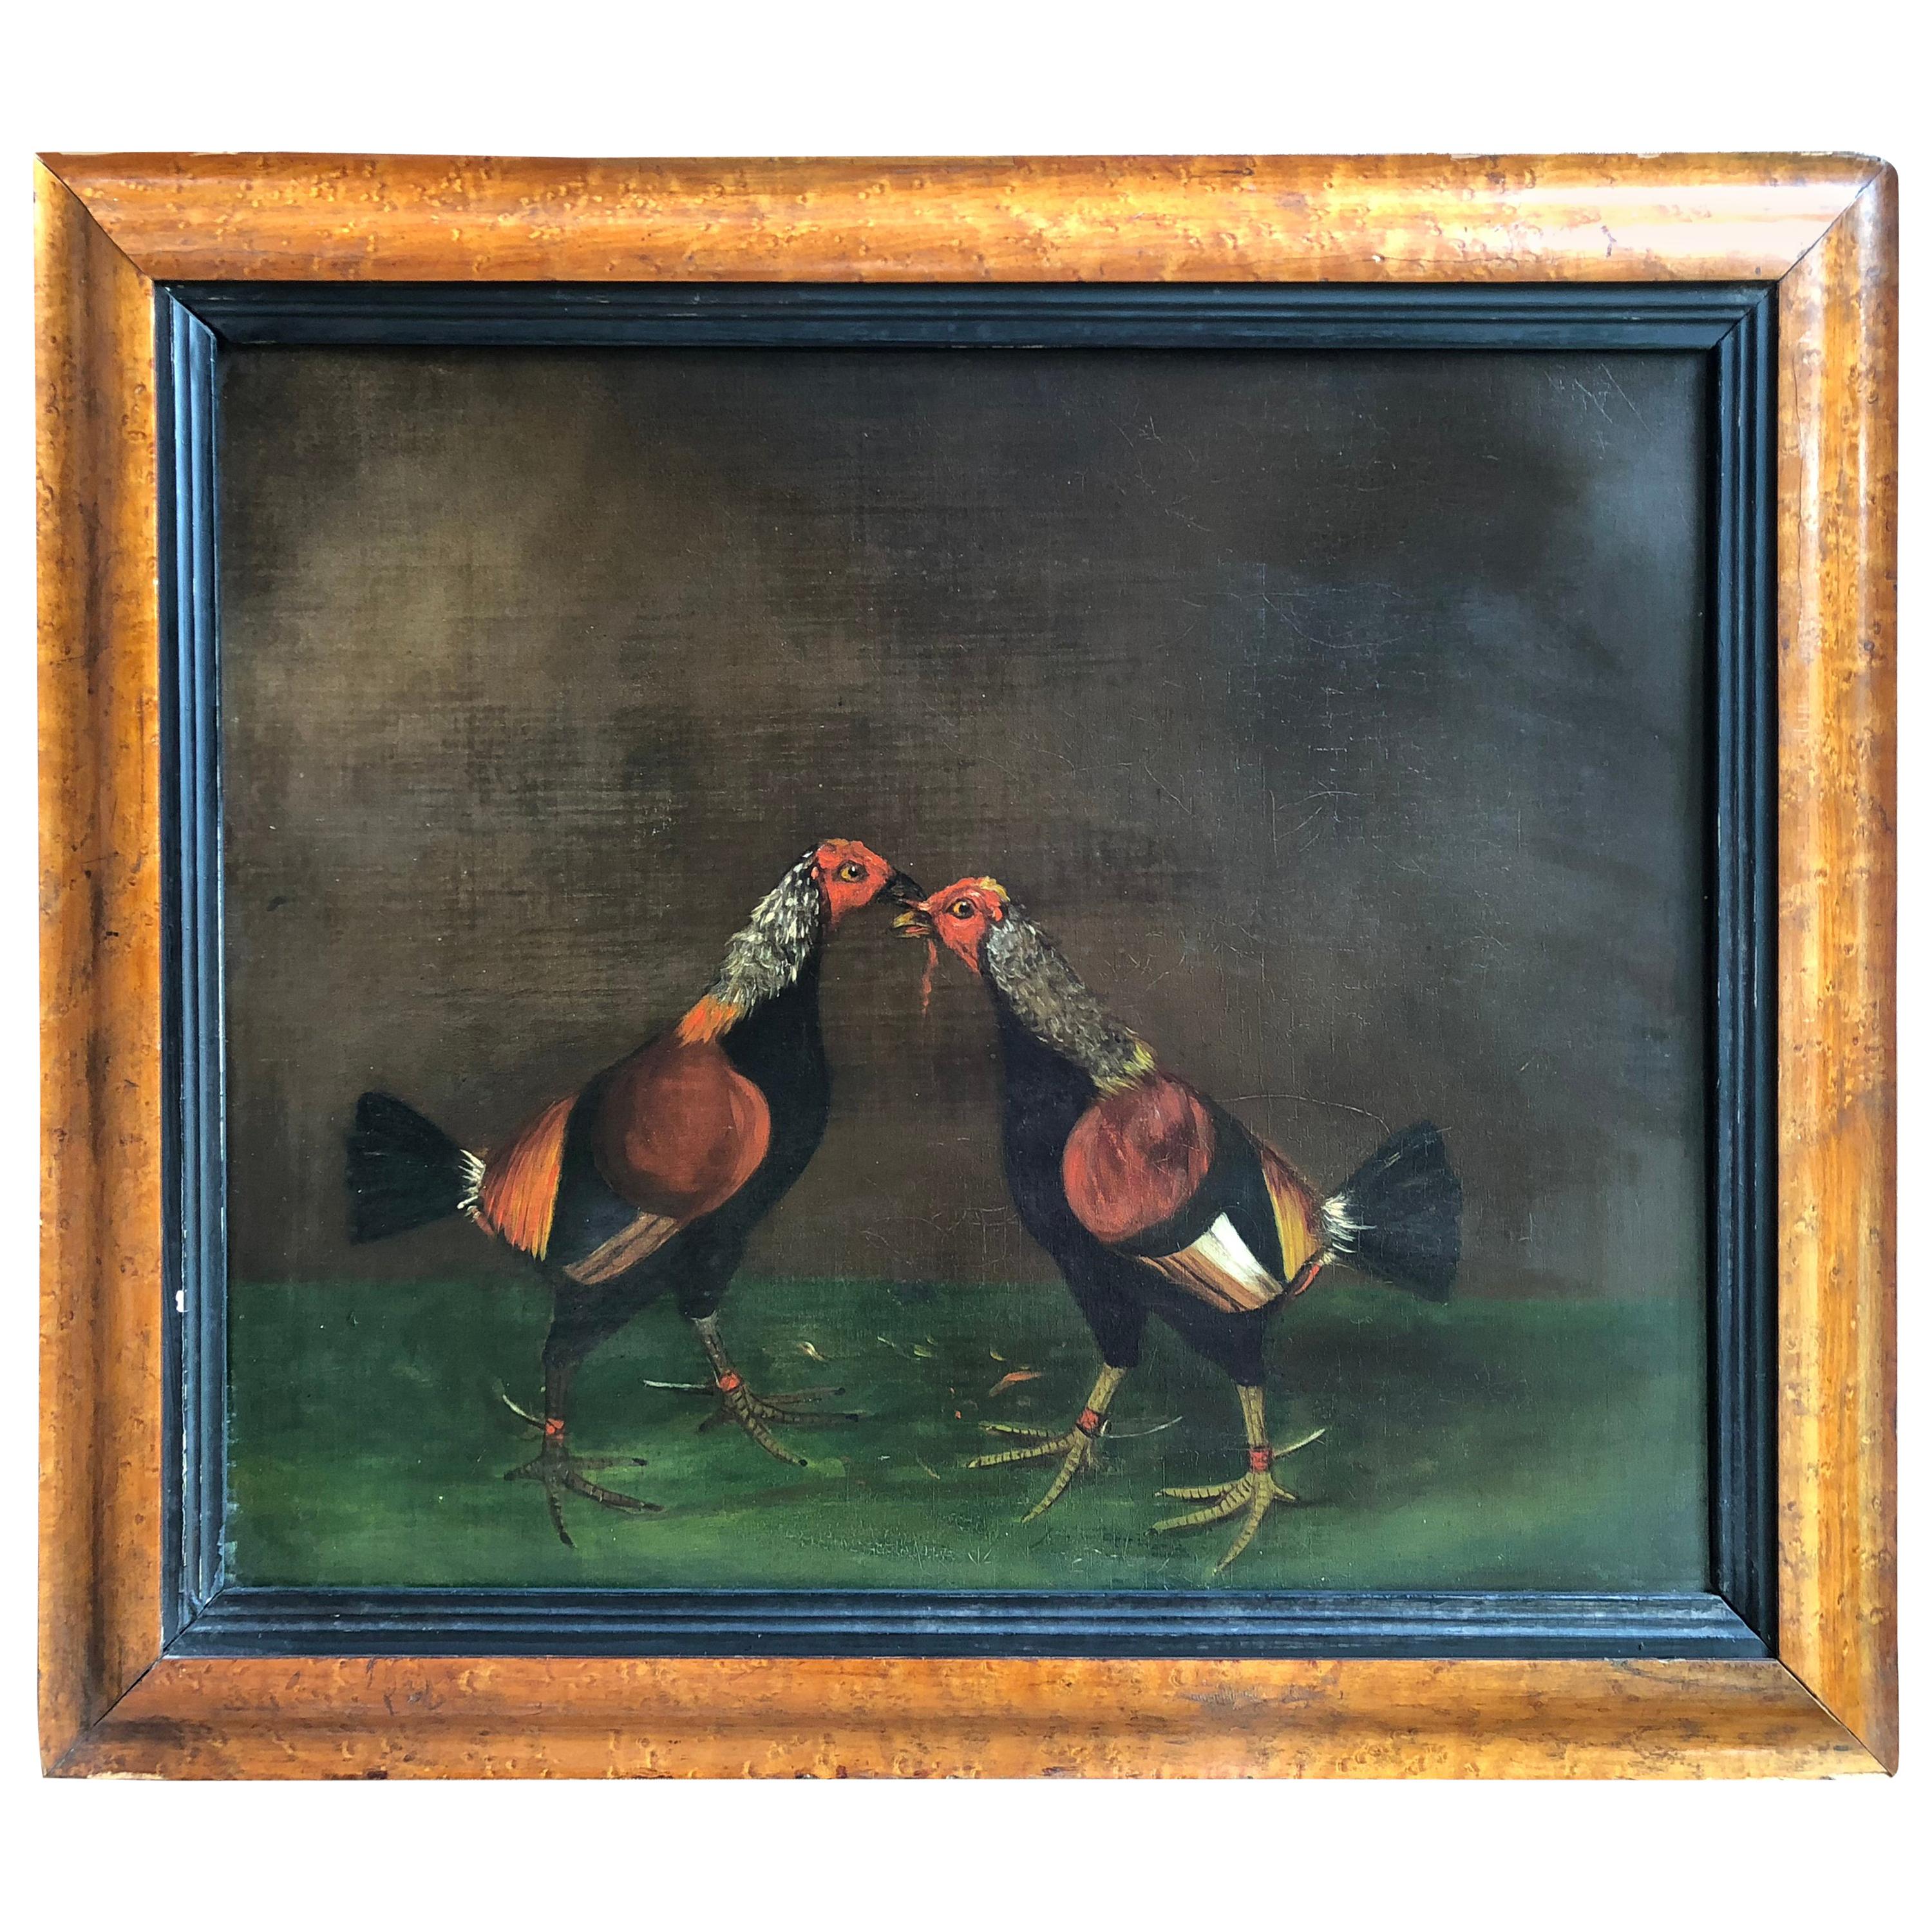 An early pair of English sporting paintings, of fighting cocks, one signed “R. Monument” and dated 1863. Paintings have been relined and are in their original bird’s-eye maple frames. Painting sizes are 22” W x 18” H each. Provenance: Collection of